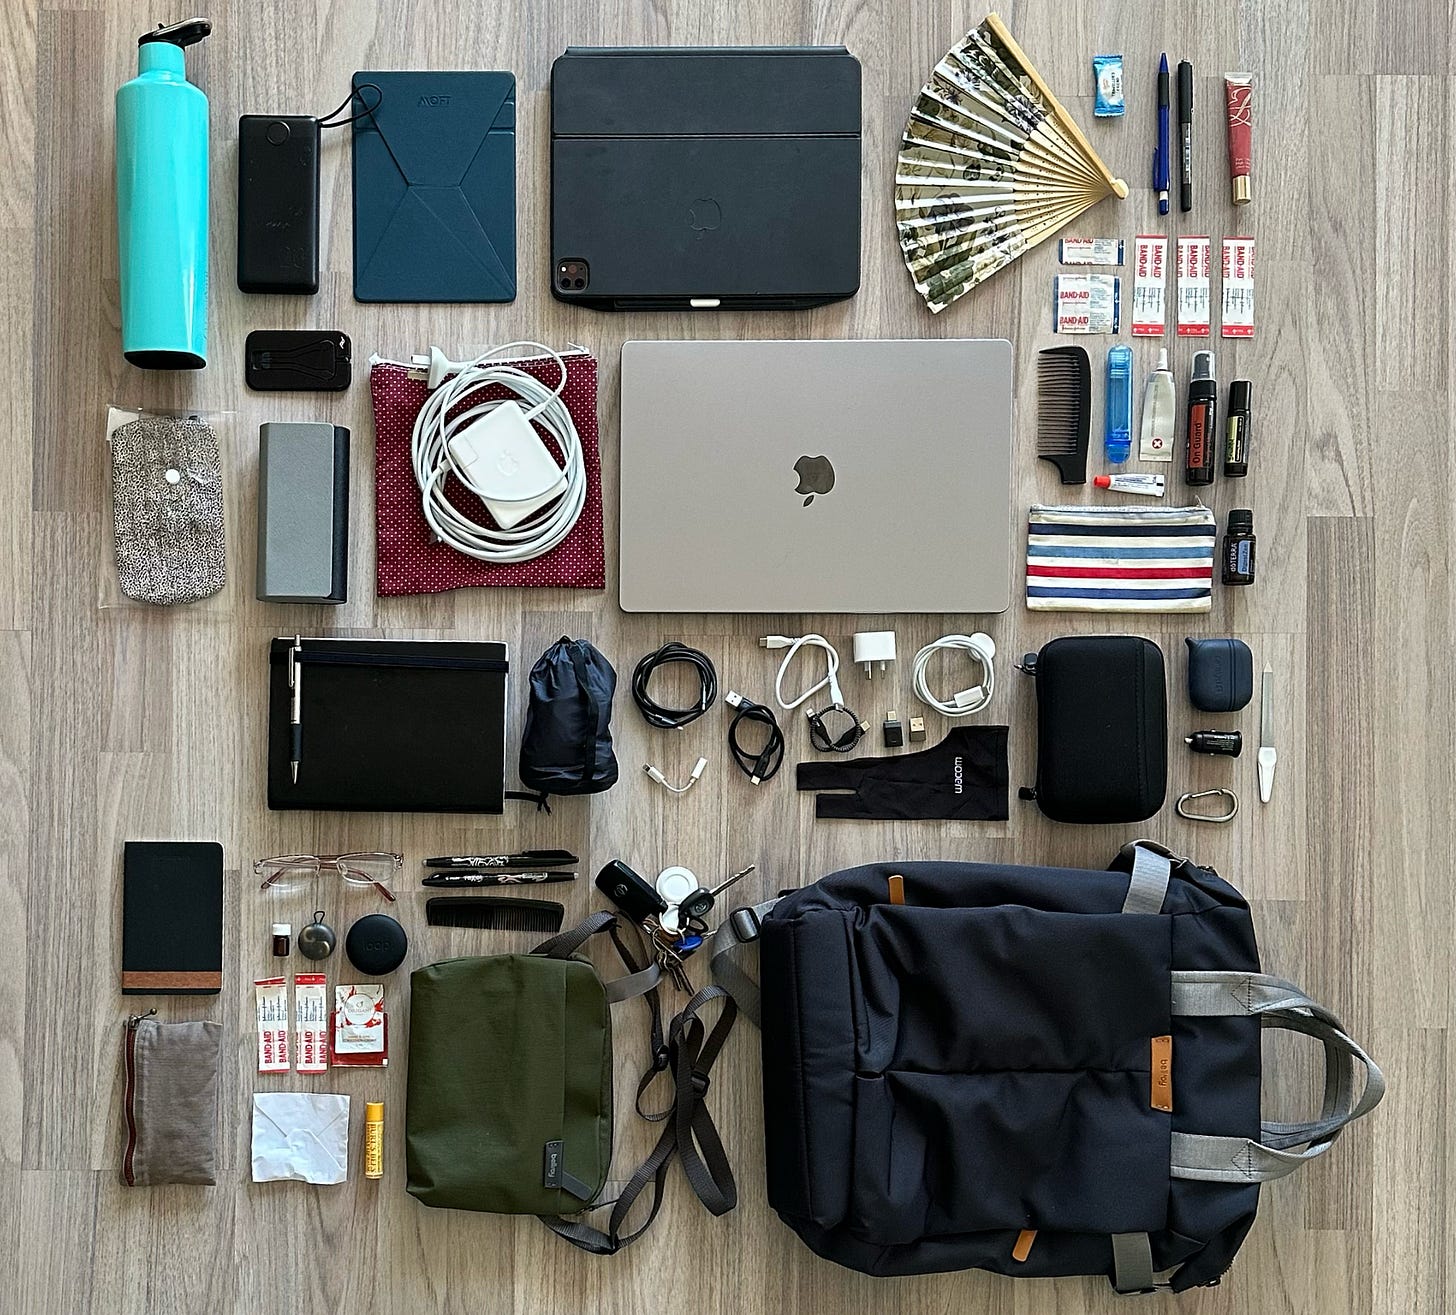 Two bags and their contents are spread in a grid formation on a multi-shade grey laminate floor. There’s an aqua drink bottle, iPad Pro, MacBook Pro, various cables, notebooks, and personal items. The full list can be found in the article itself.